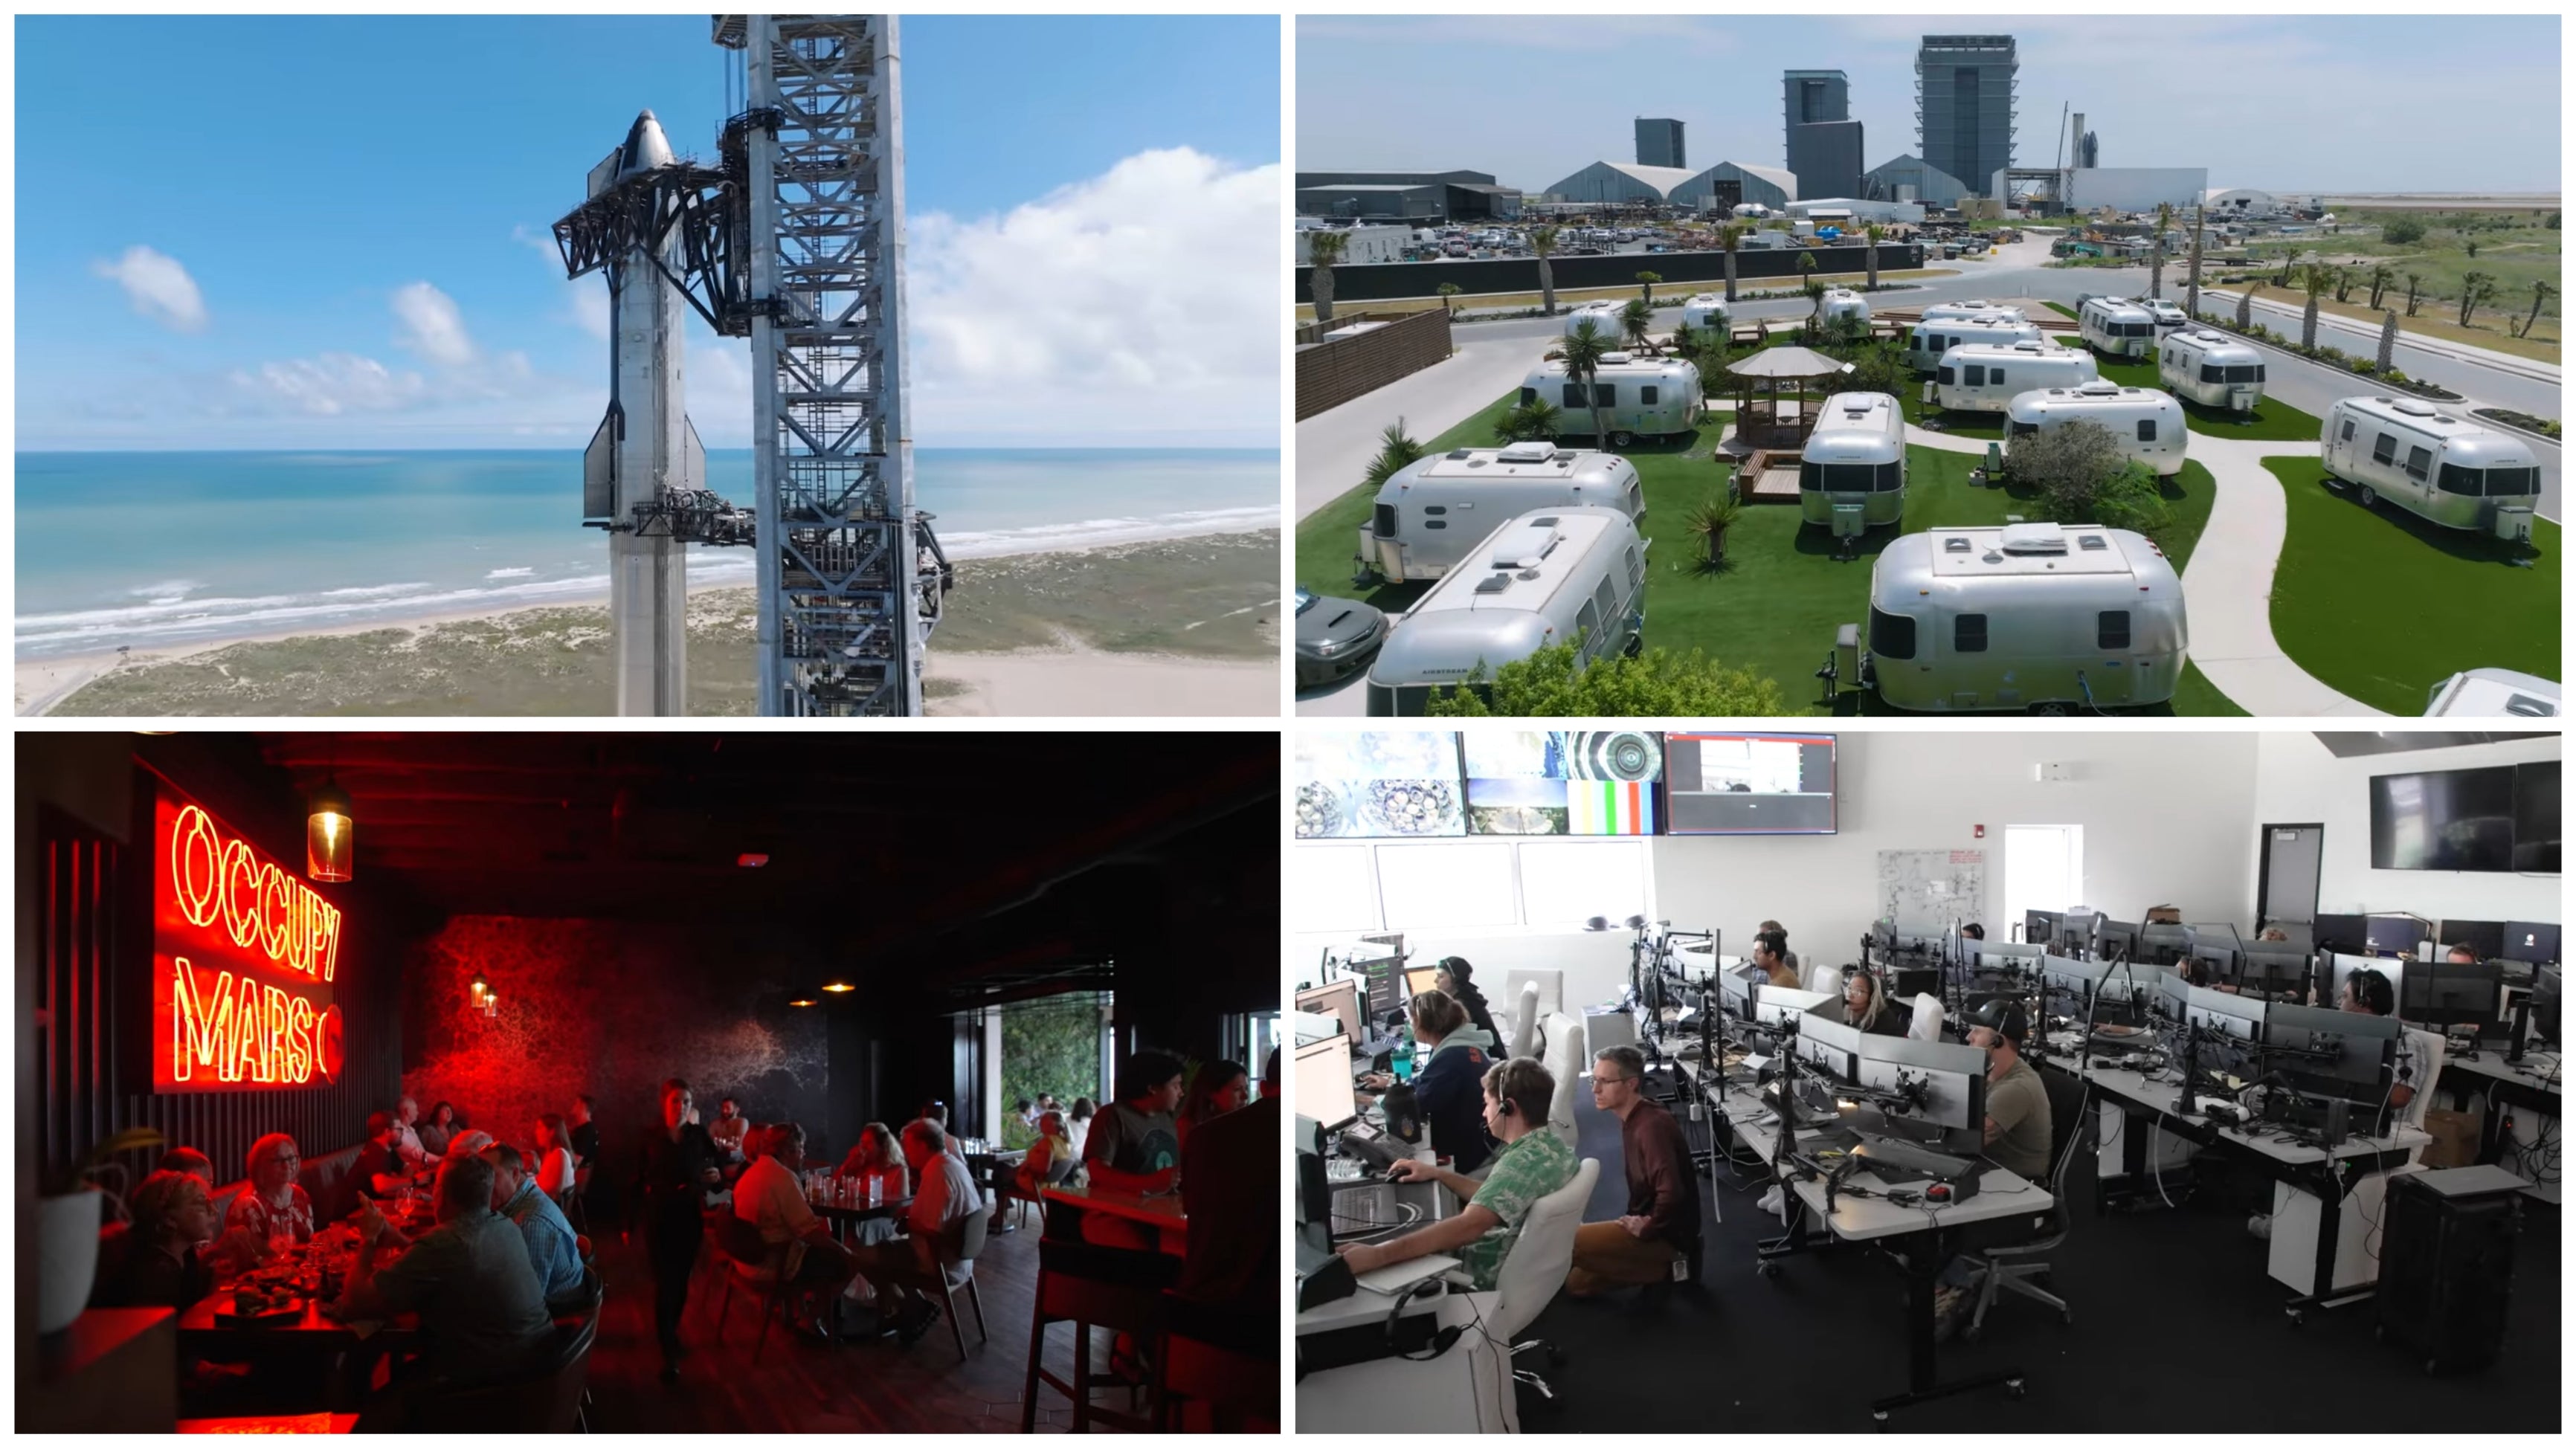 SpaceX Shares An Inspiring Video Of Employee 'Life at Starbase'